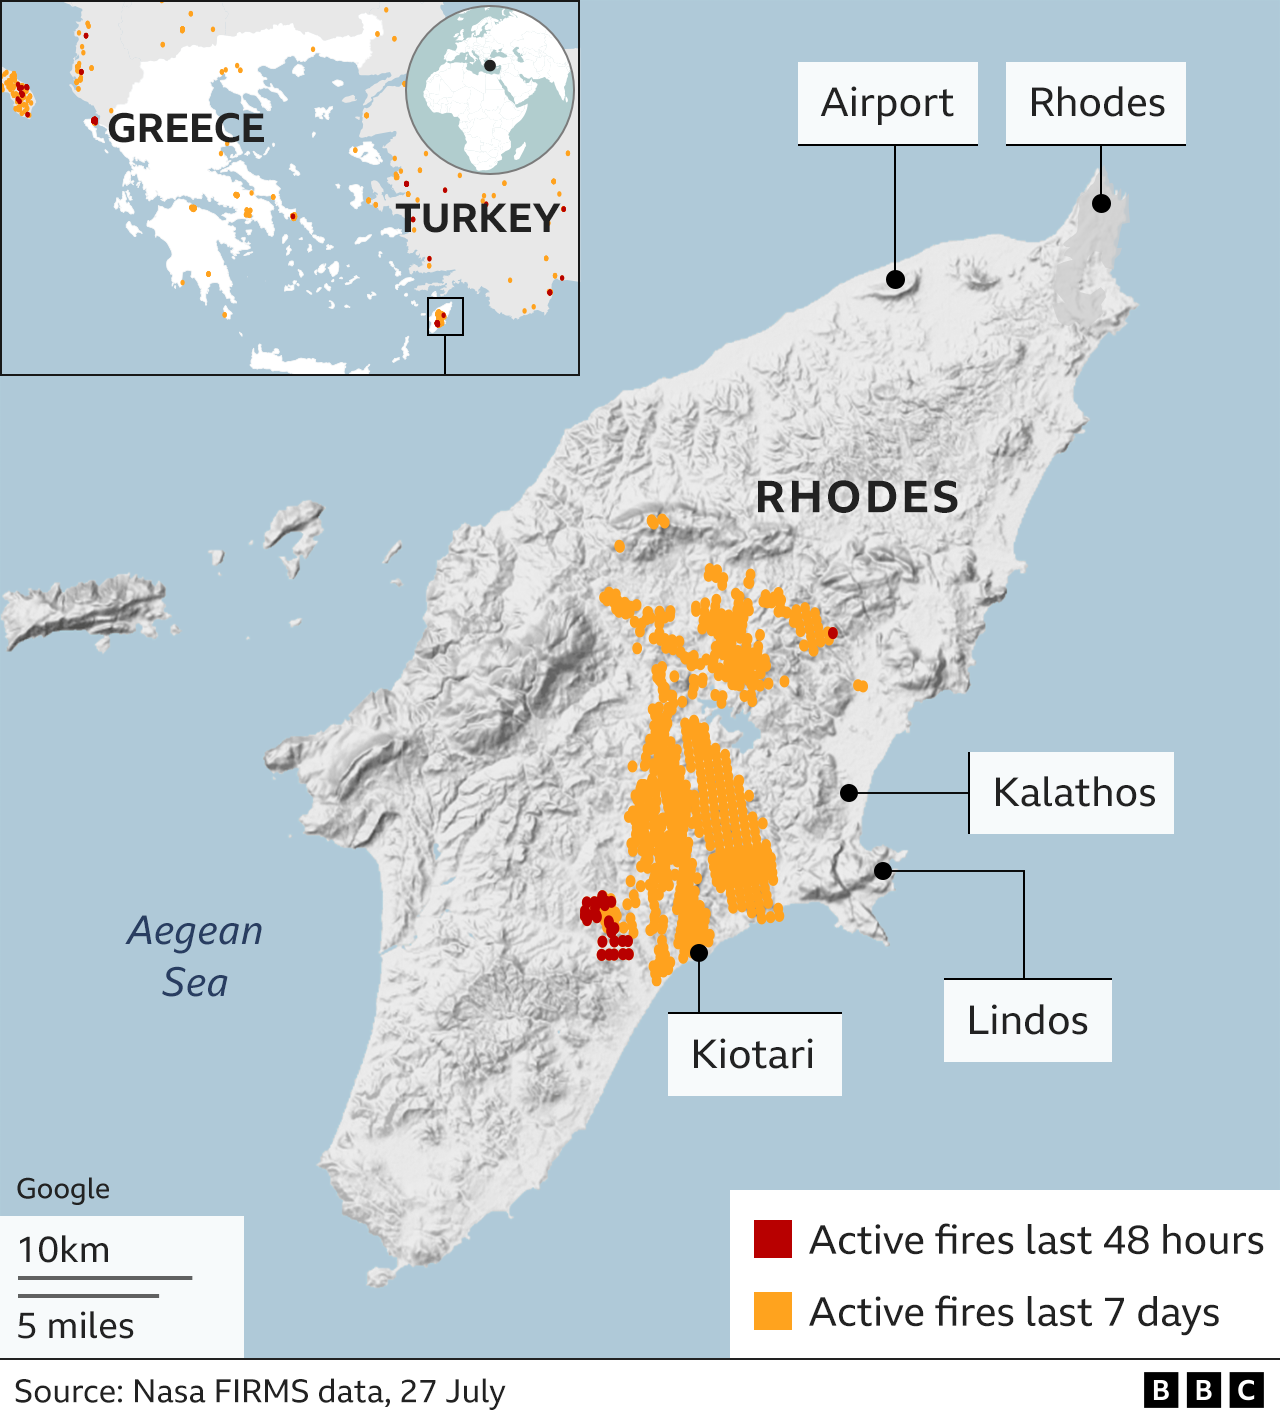 Greece Fires In Maps And Satellite Images Show Extent Of Damage - Bbc News